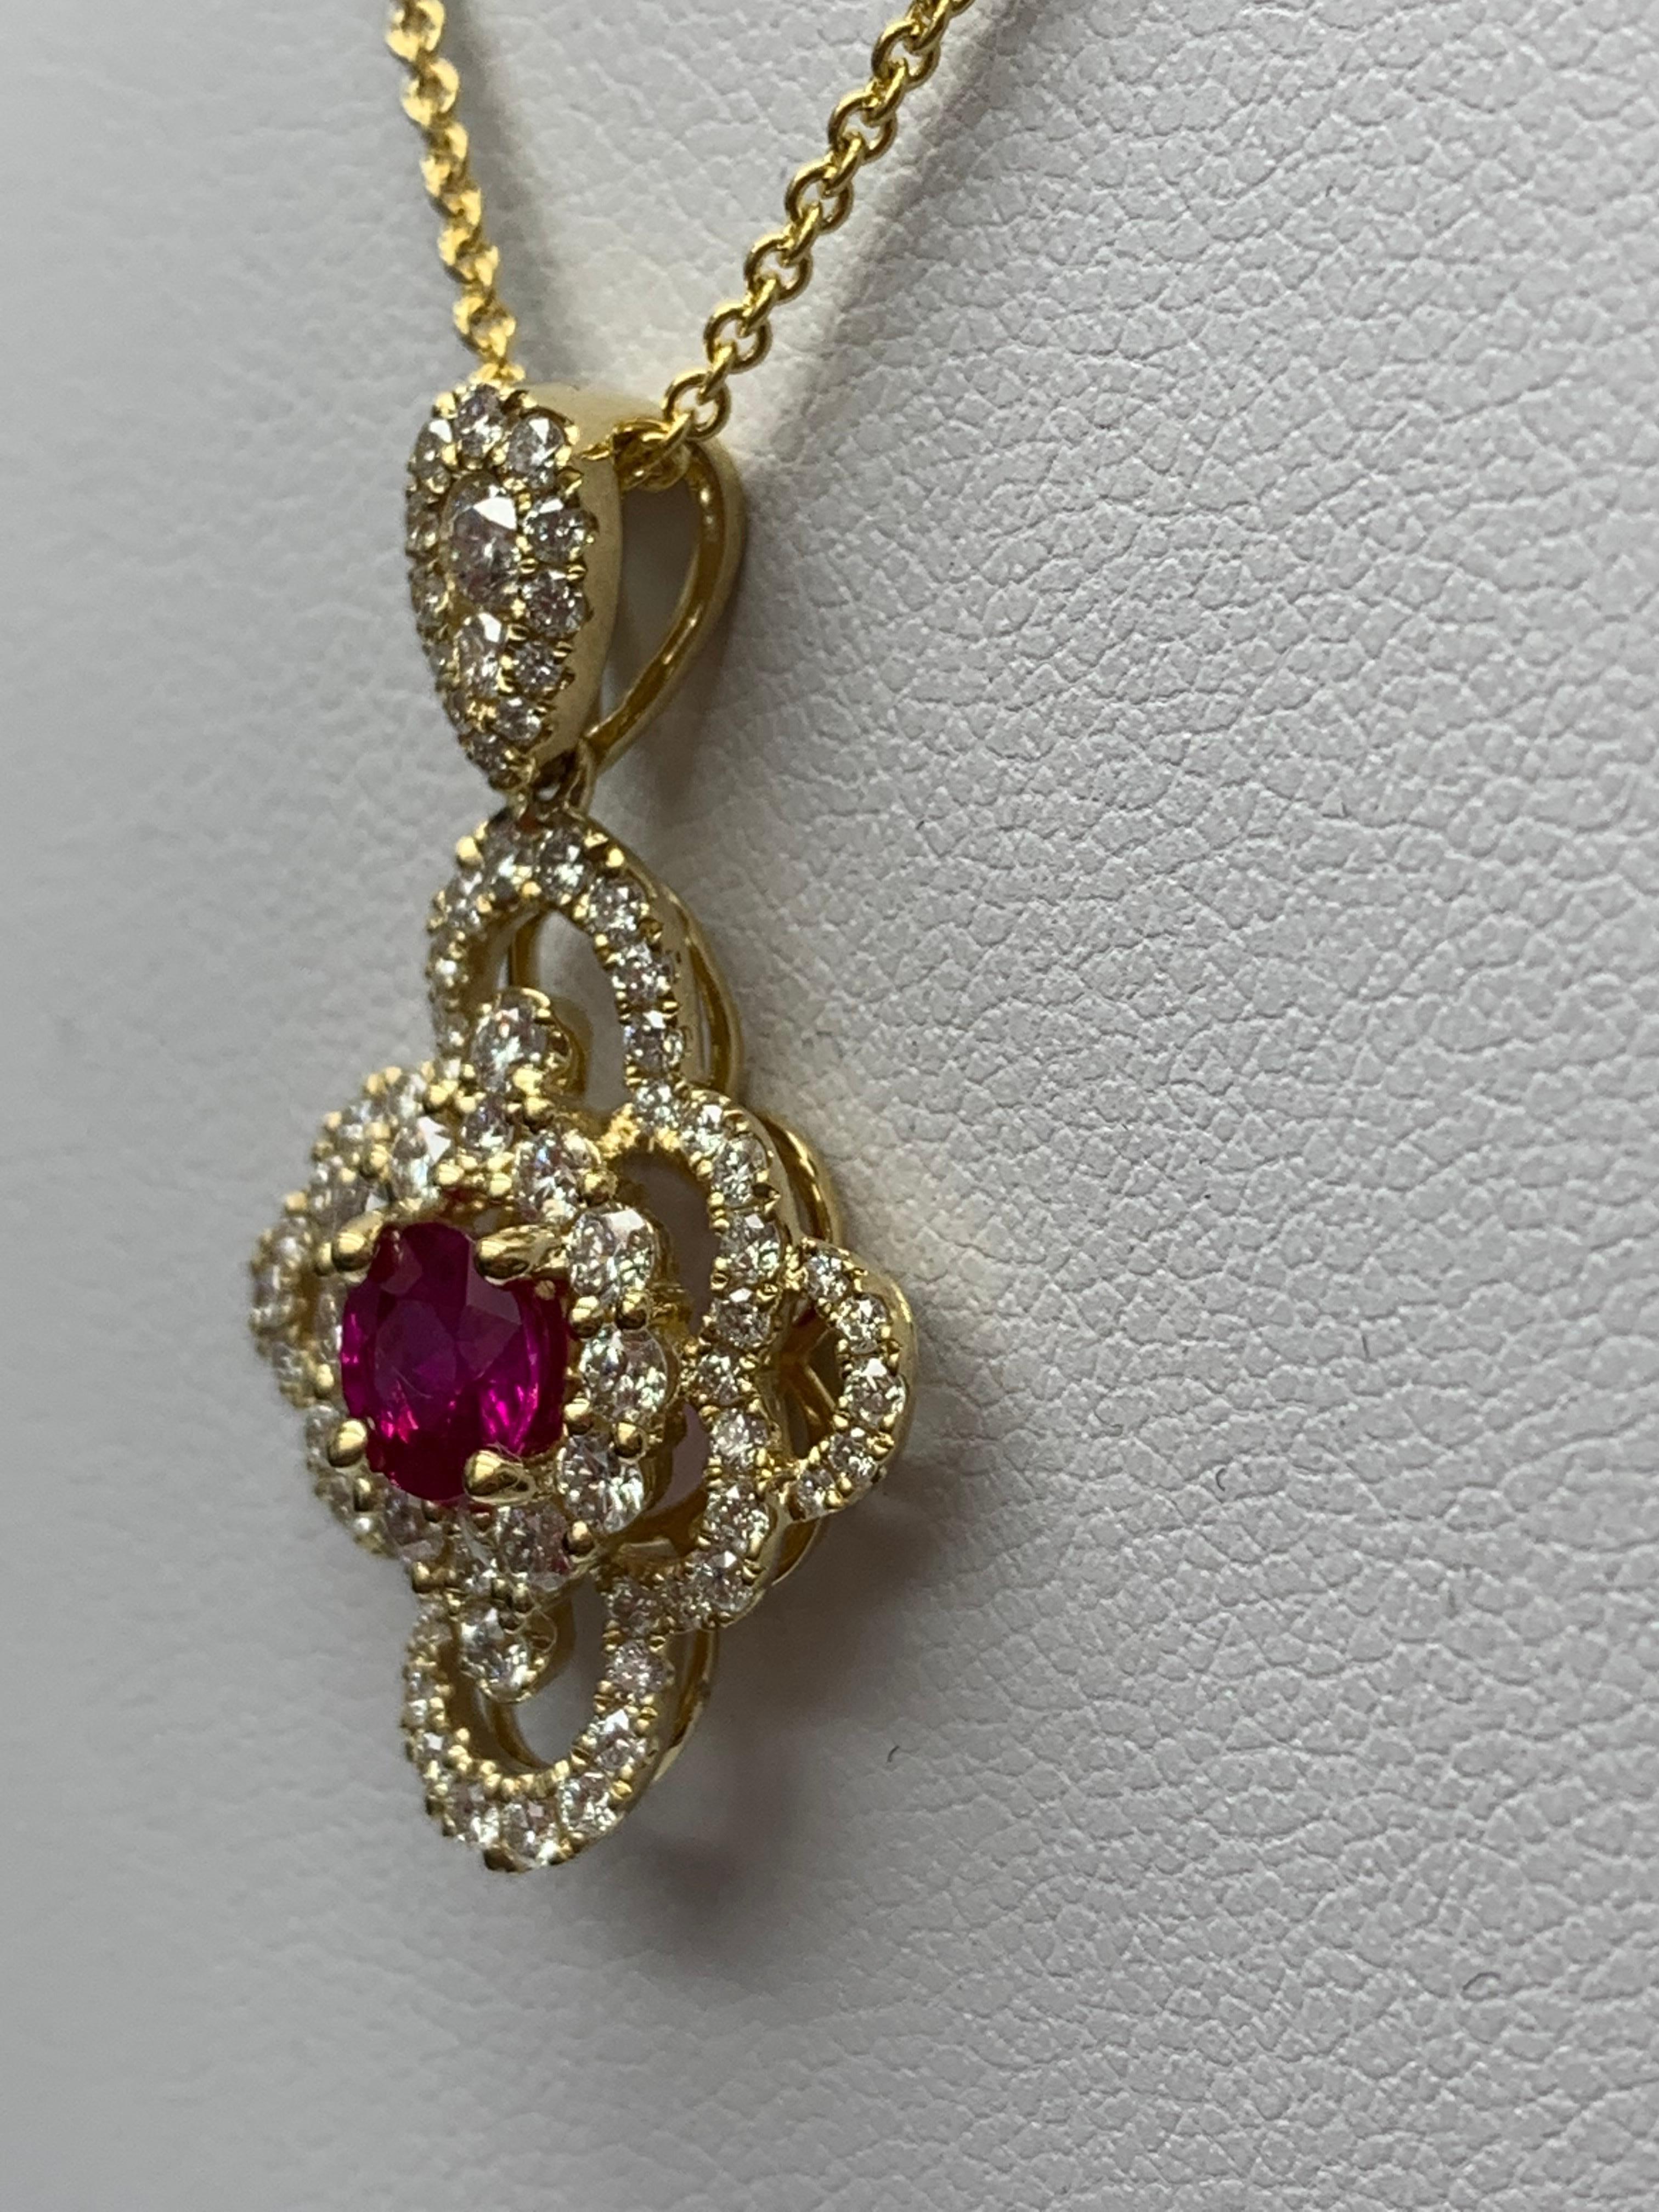 0.67 Carat Round Cut Ruby and Diamond Pendant Necklace in 18K Yellow Gold For Sale 1